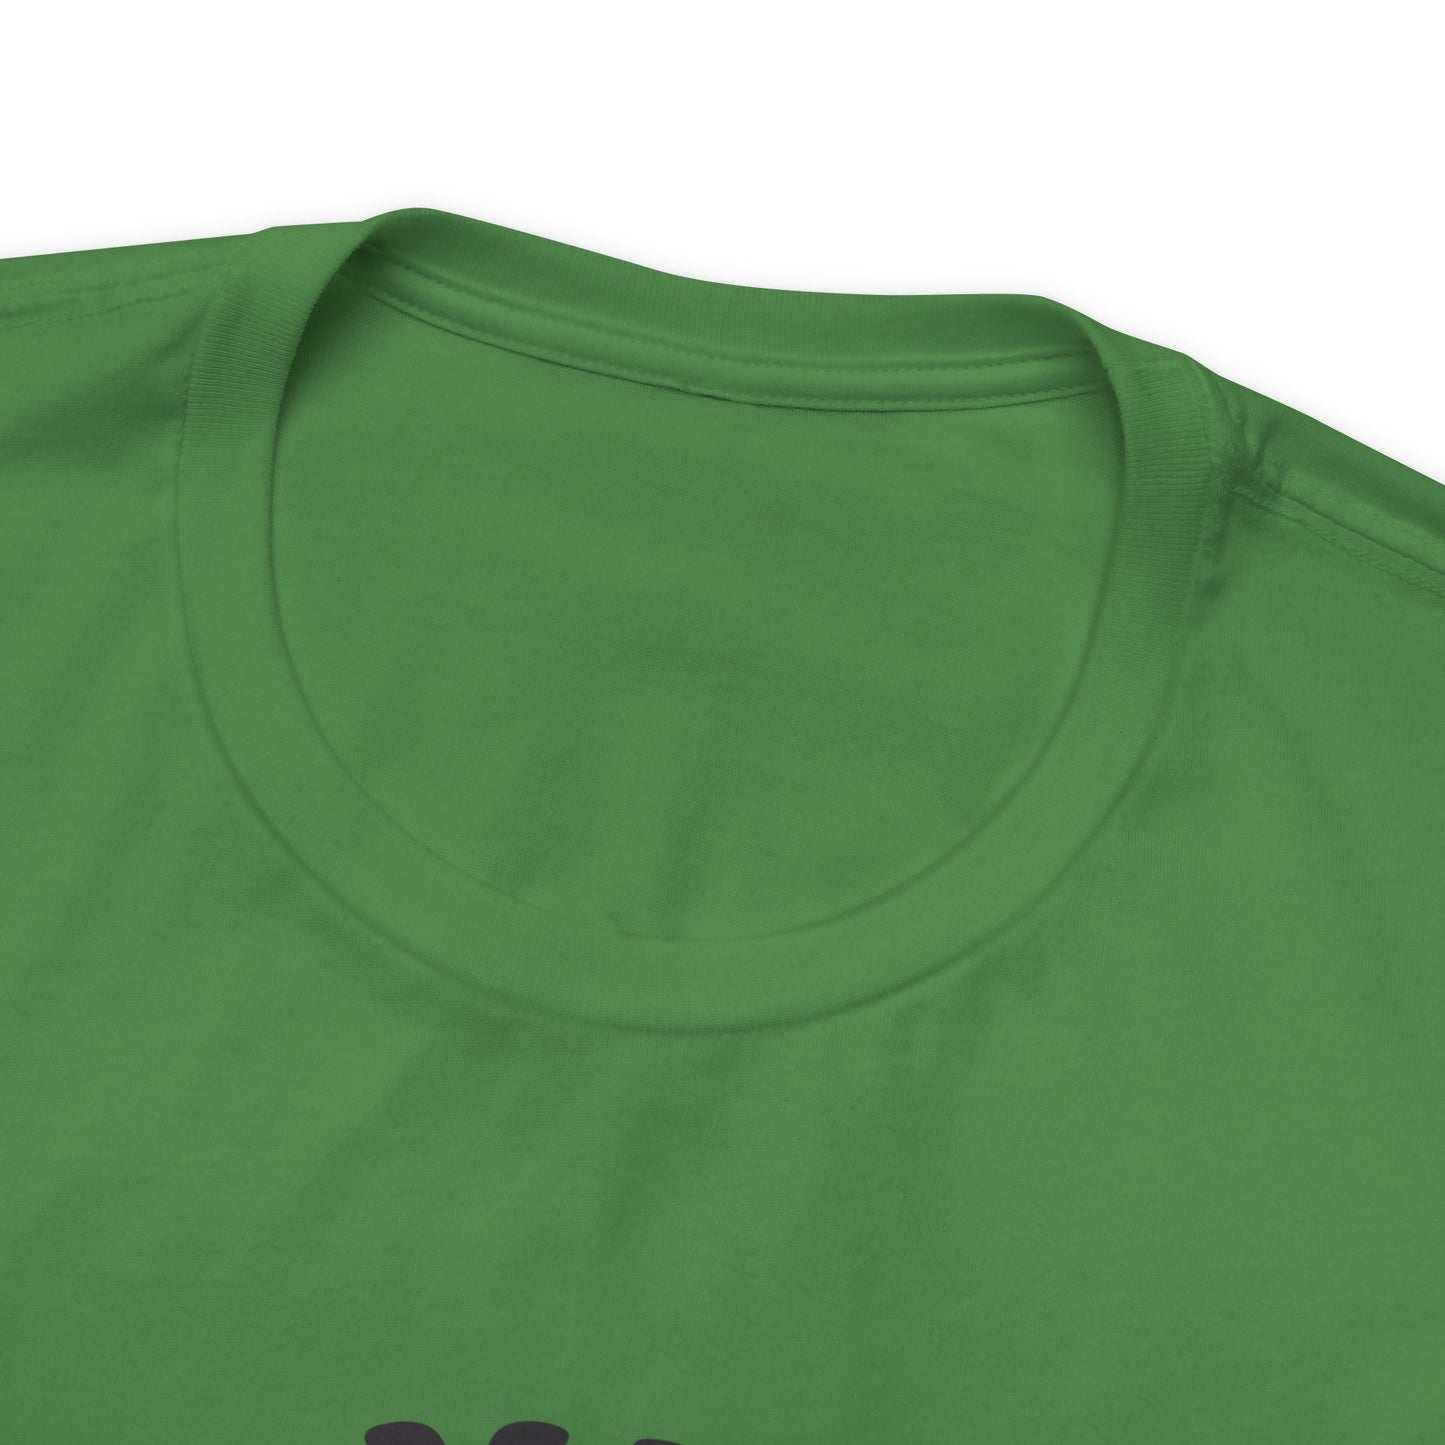 Shamrock and Roll Men's Tee